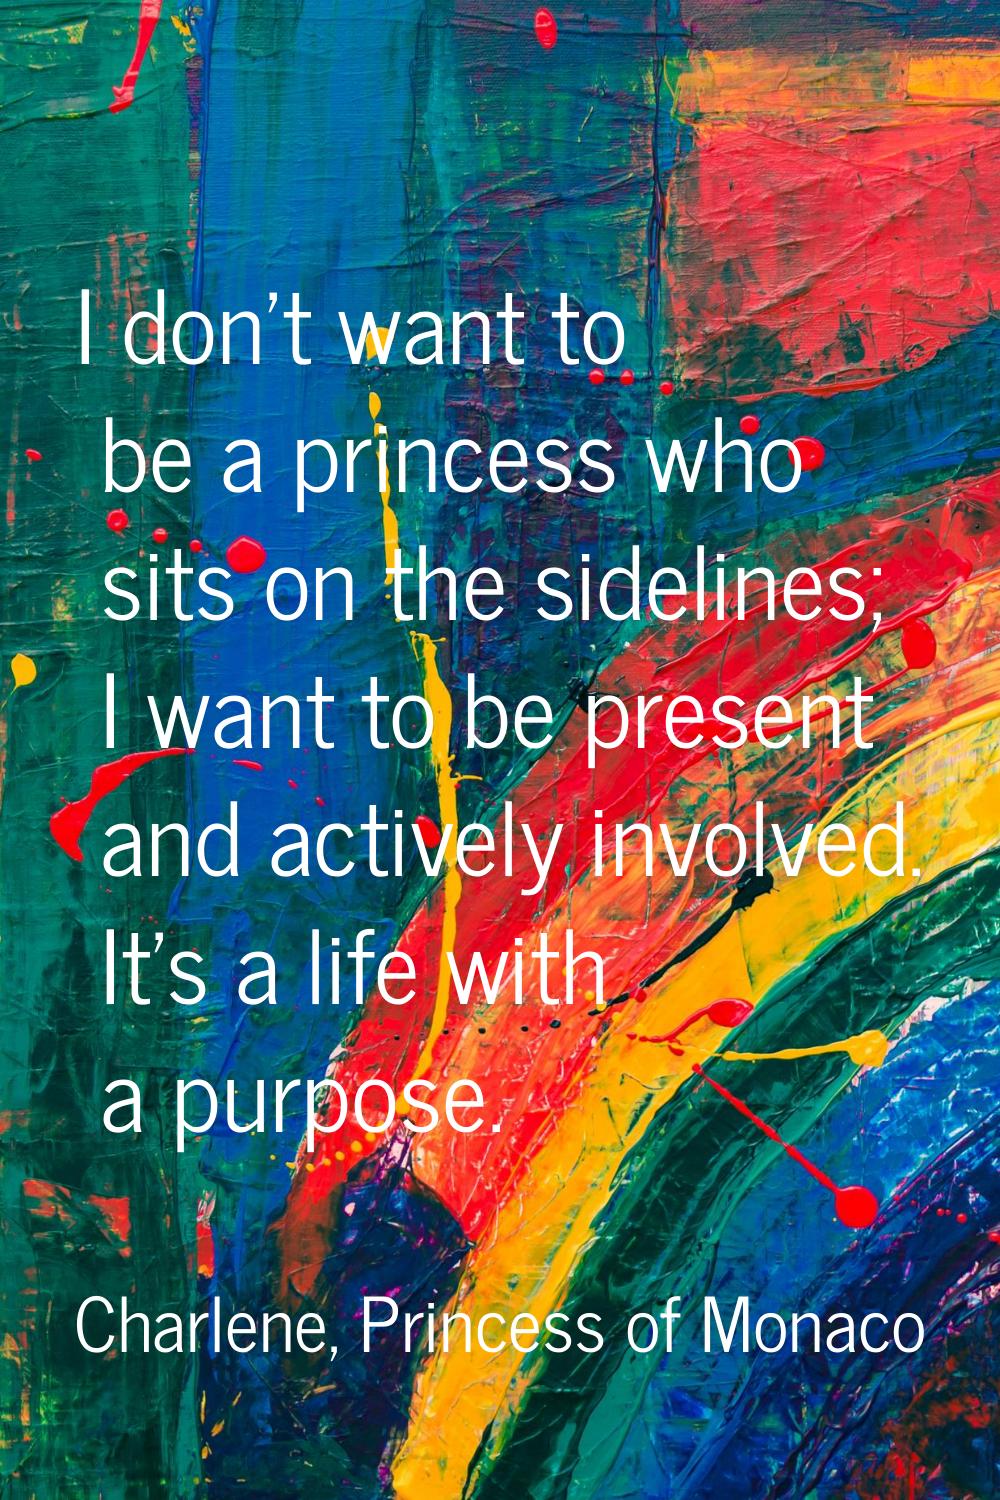 I don't want to be a princess who sits on the sidelines; I want to be present and actively involved